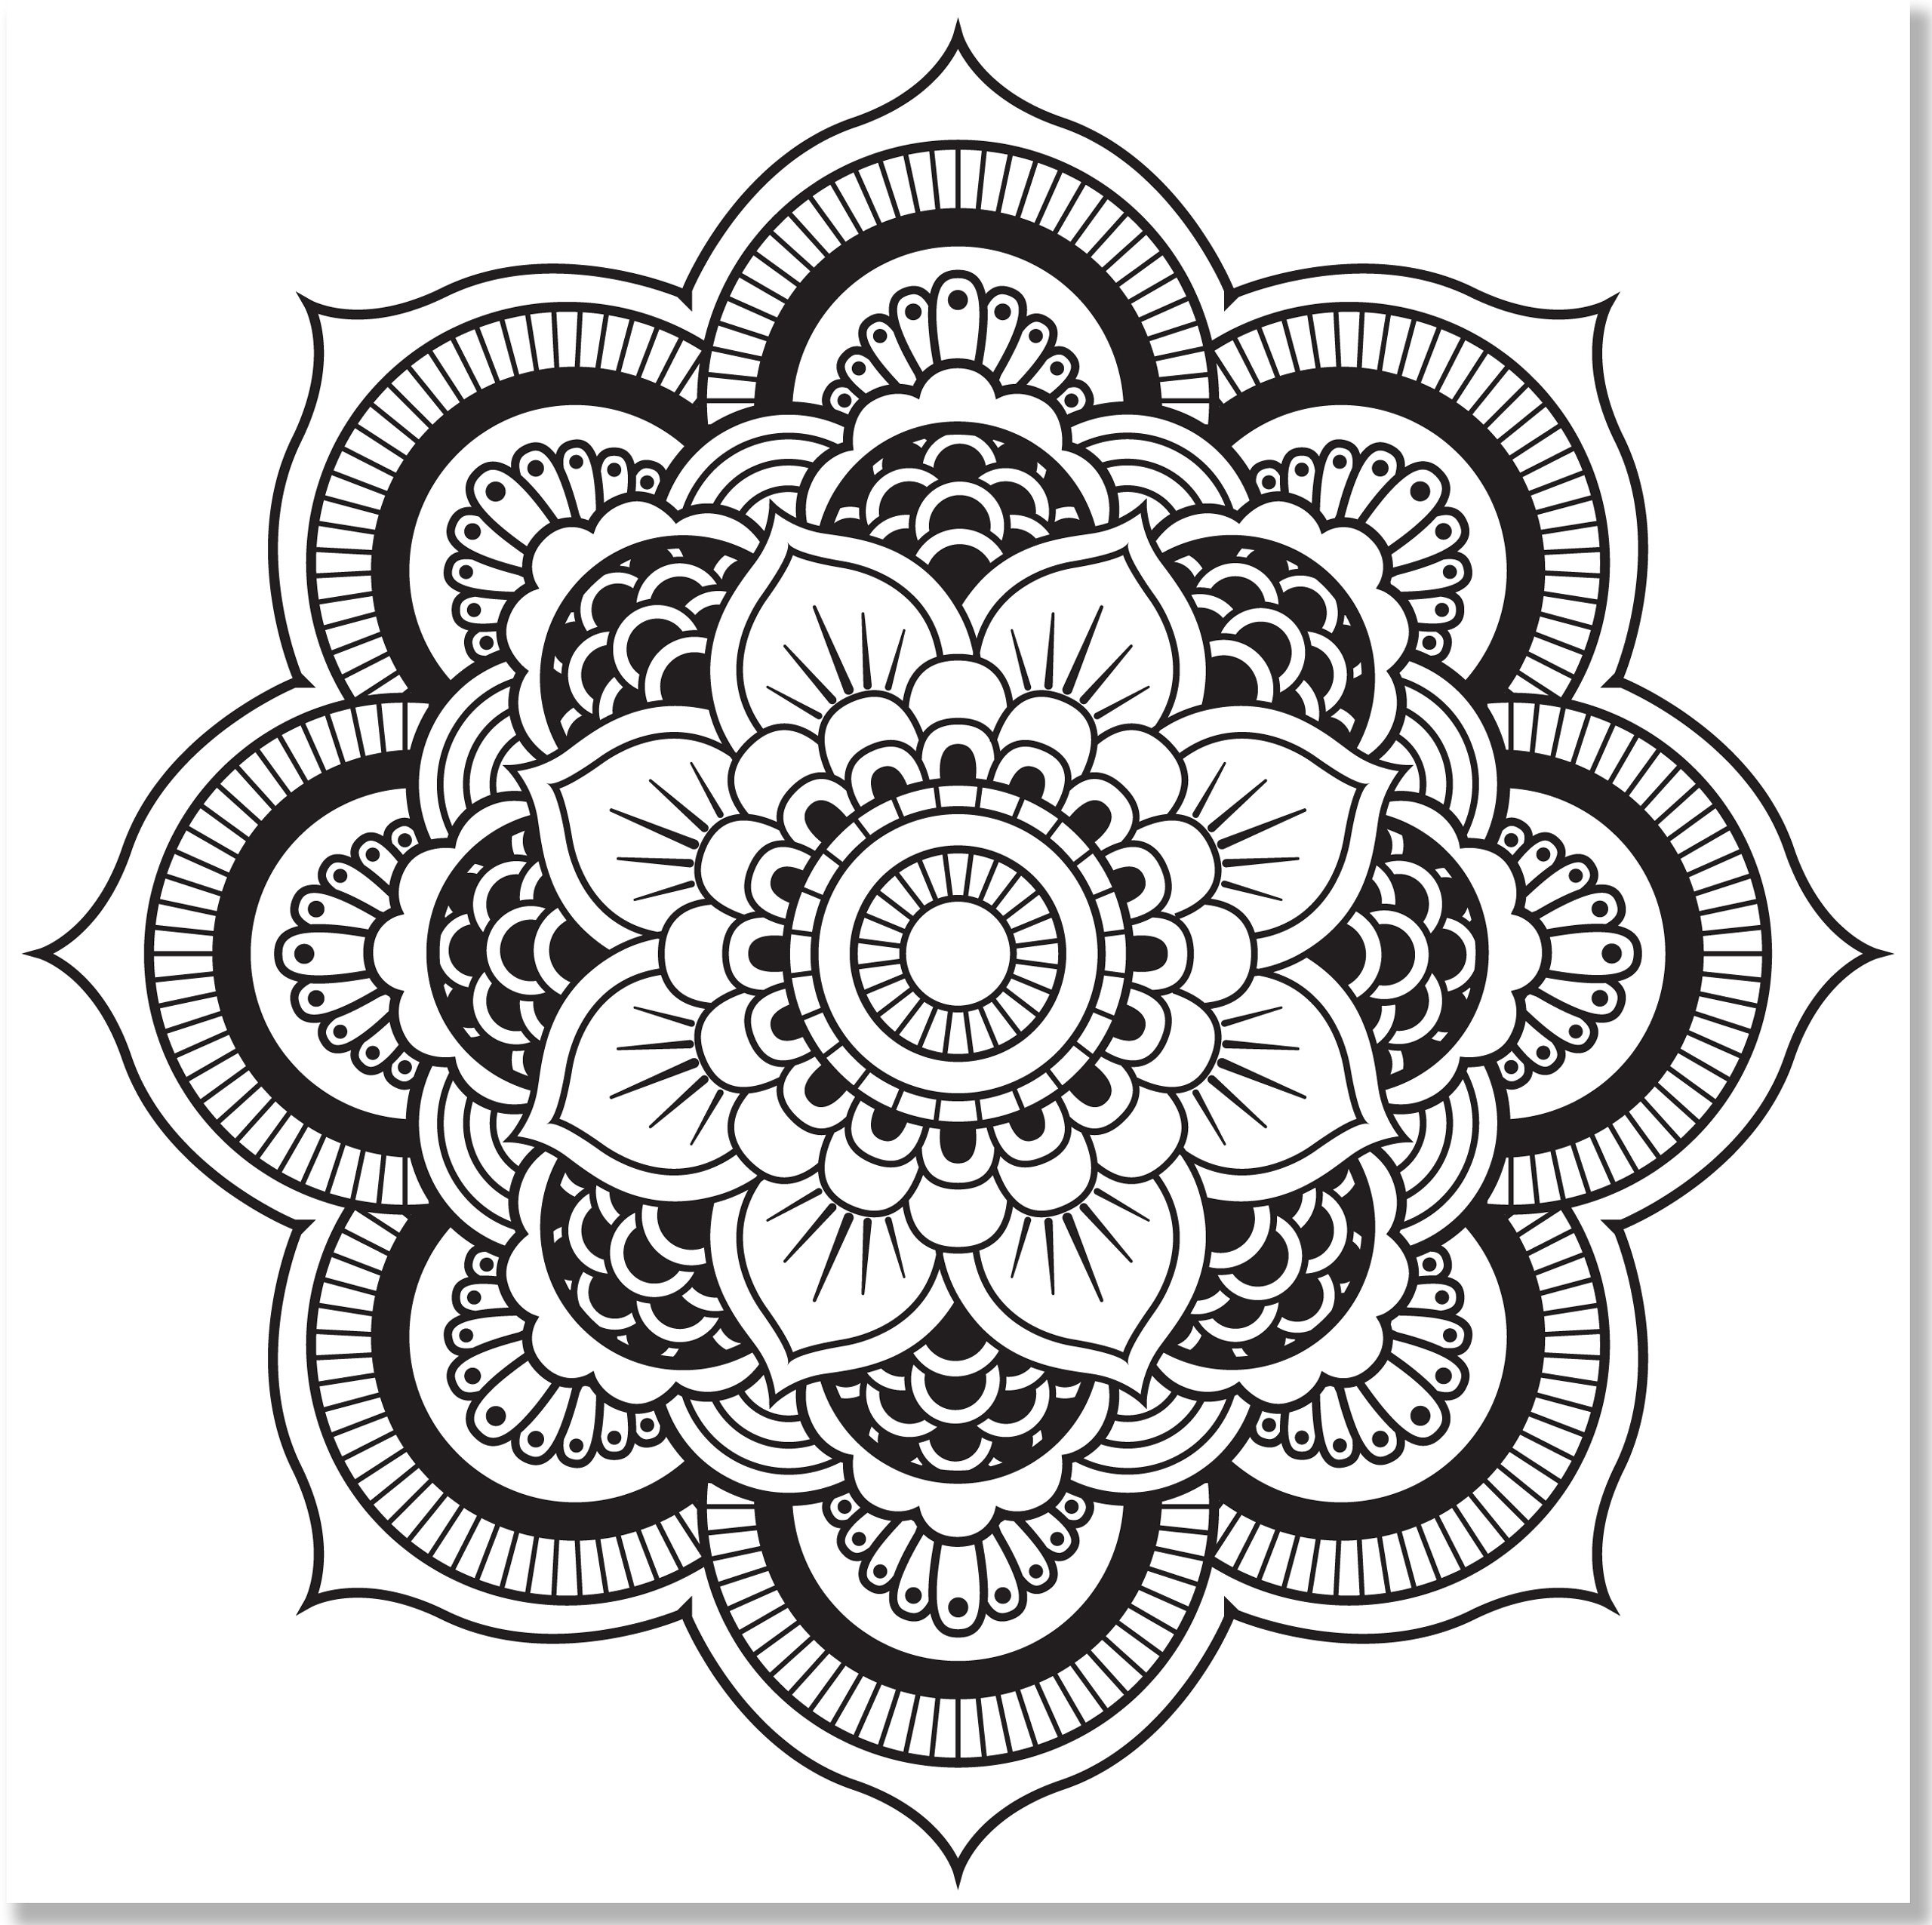 Coloring Book World ~ Coloring Book World Mandalas For Adults Free - Free Printable Mandala Coloring Pages For Adults